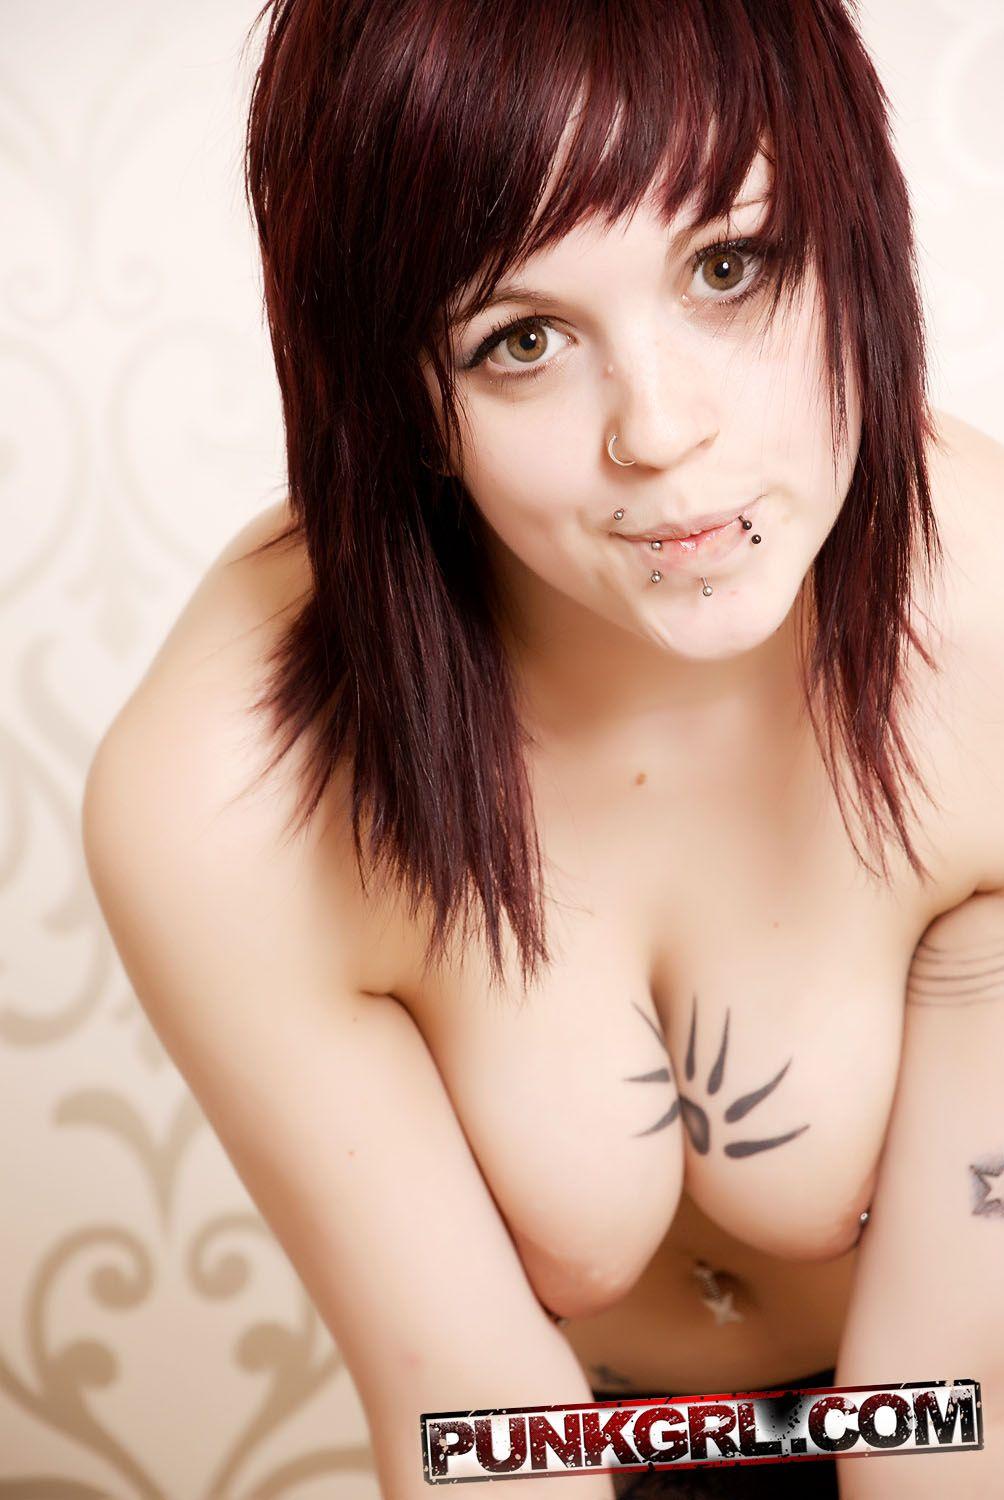 Pictures of cute punk teen Danie Chaos showing her hot tits #60766515